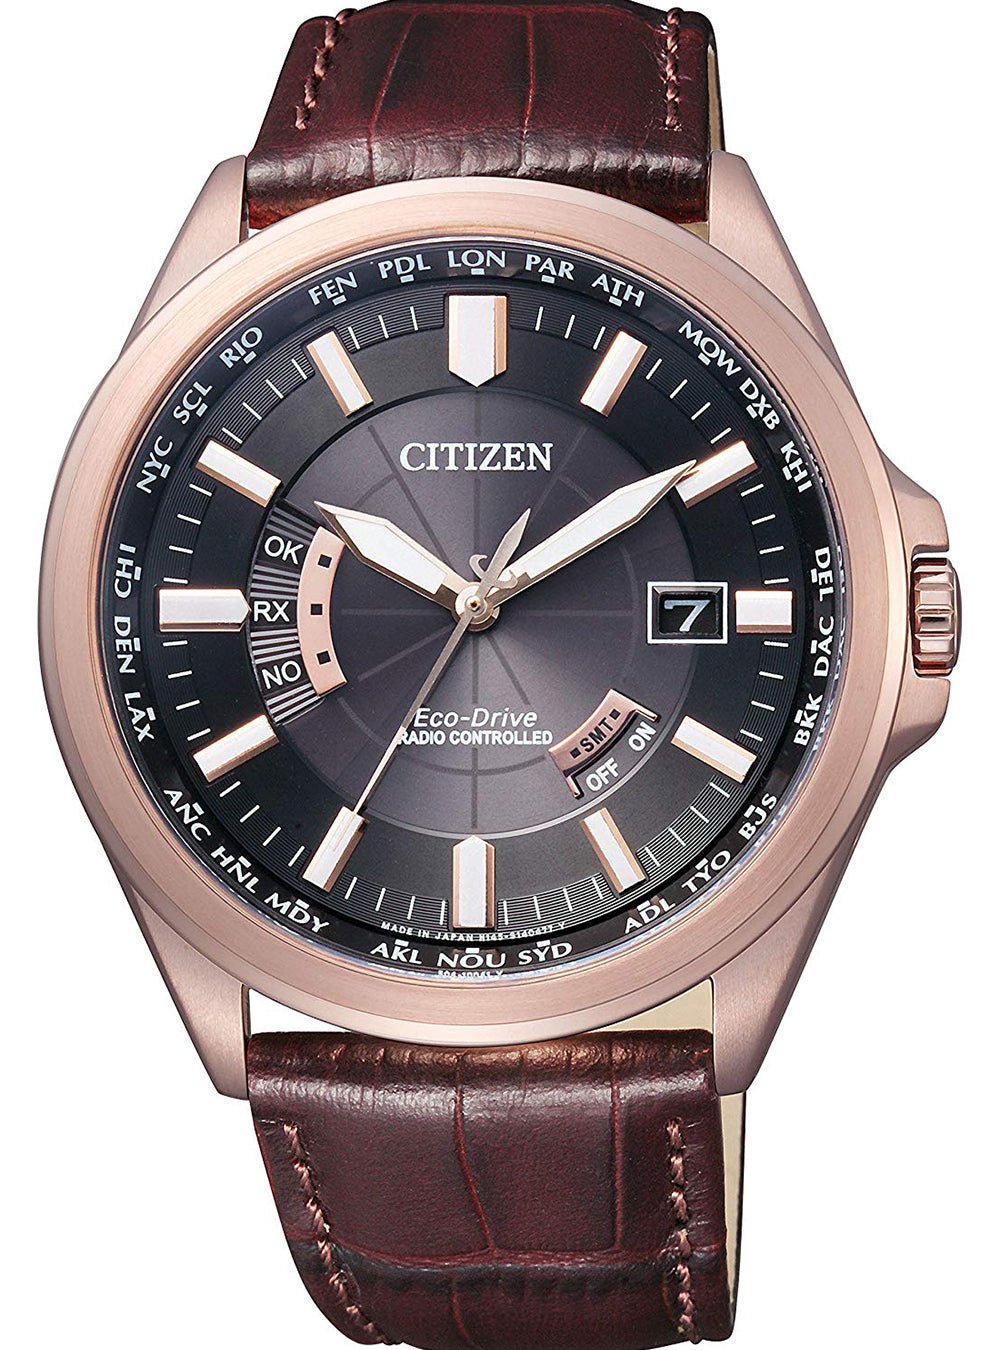 CITIZEN Collection Eco-Drive CB0012-07E made in japan mens JDM (Japanese Domestic Market)WRISTWATCHjapan-select